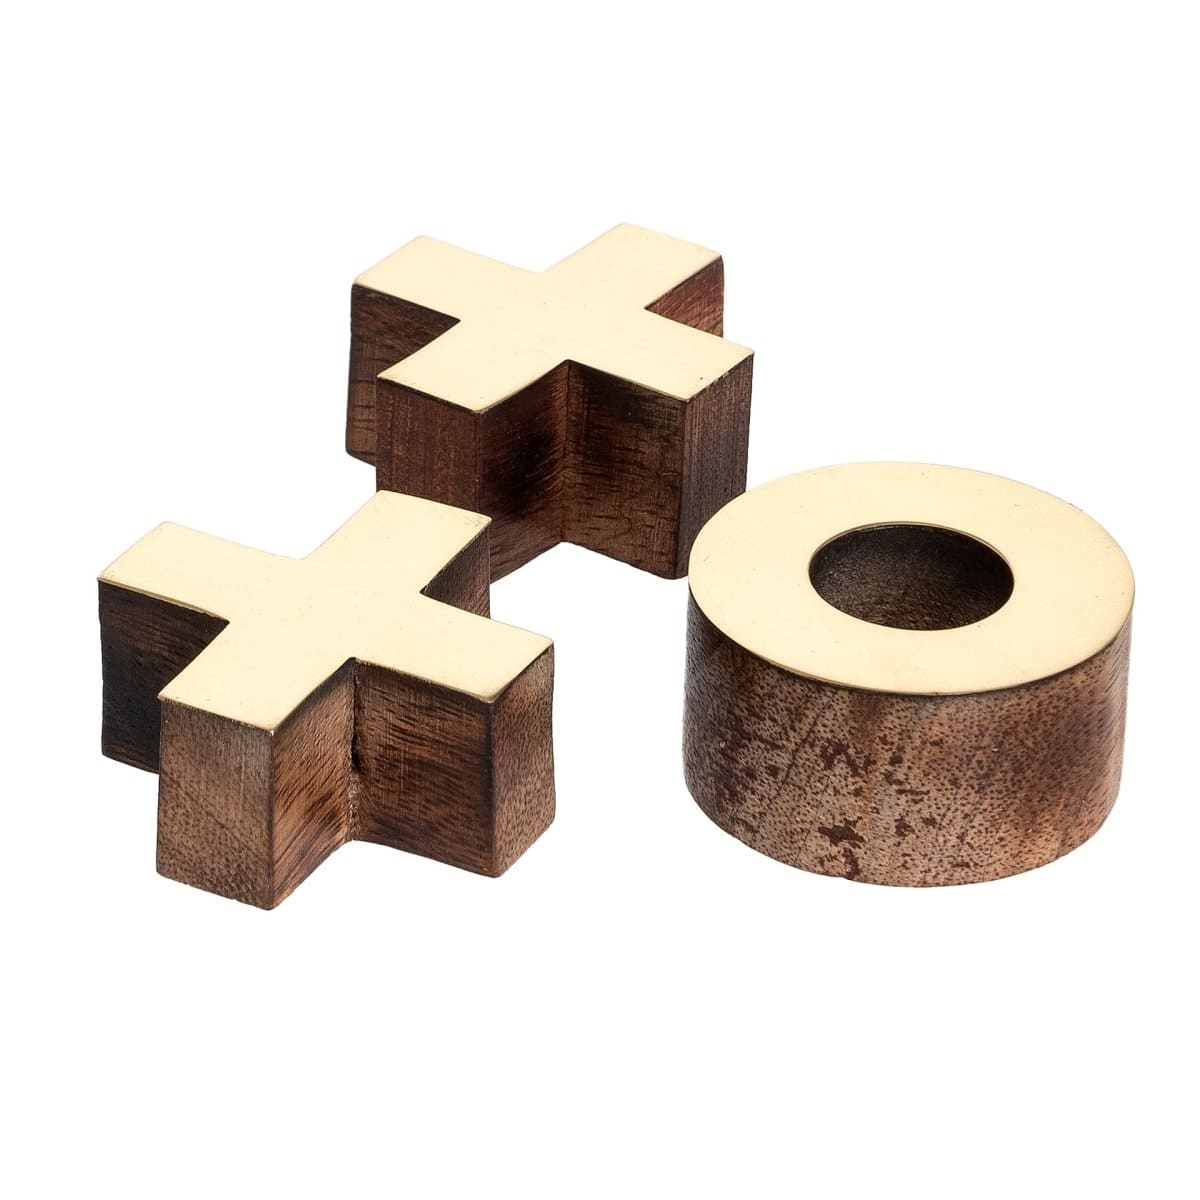 Wooden Tic Tac Toe Retro Game and Puzzles by Harvey Makin - Games & Puzzles by Harvey Makin